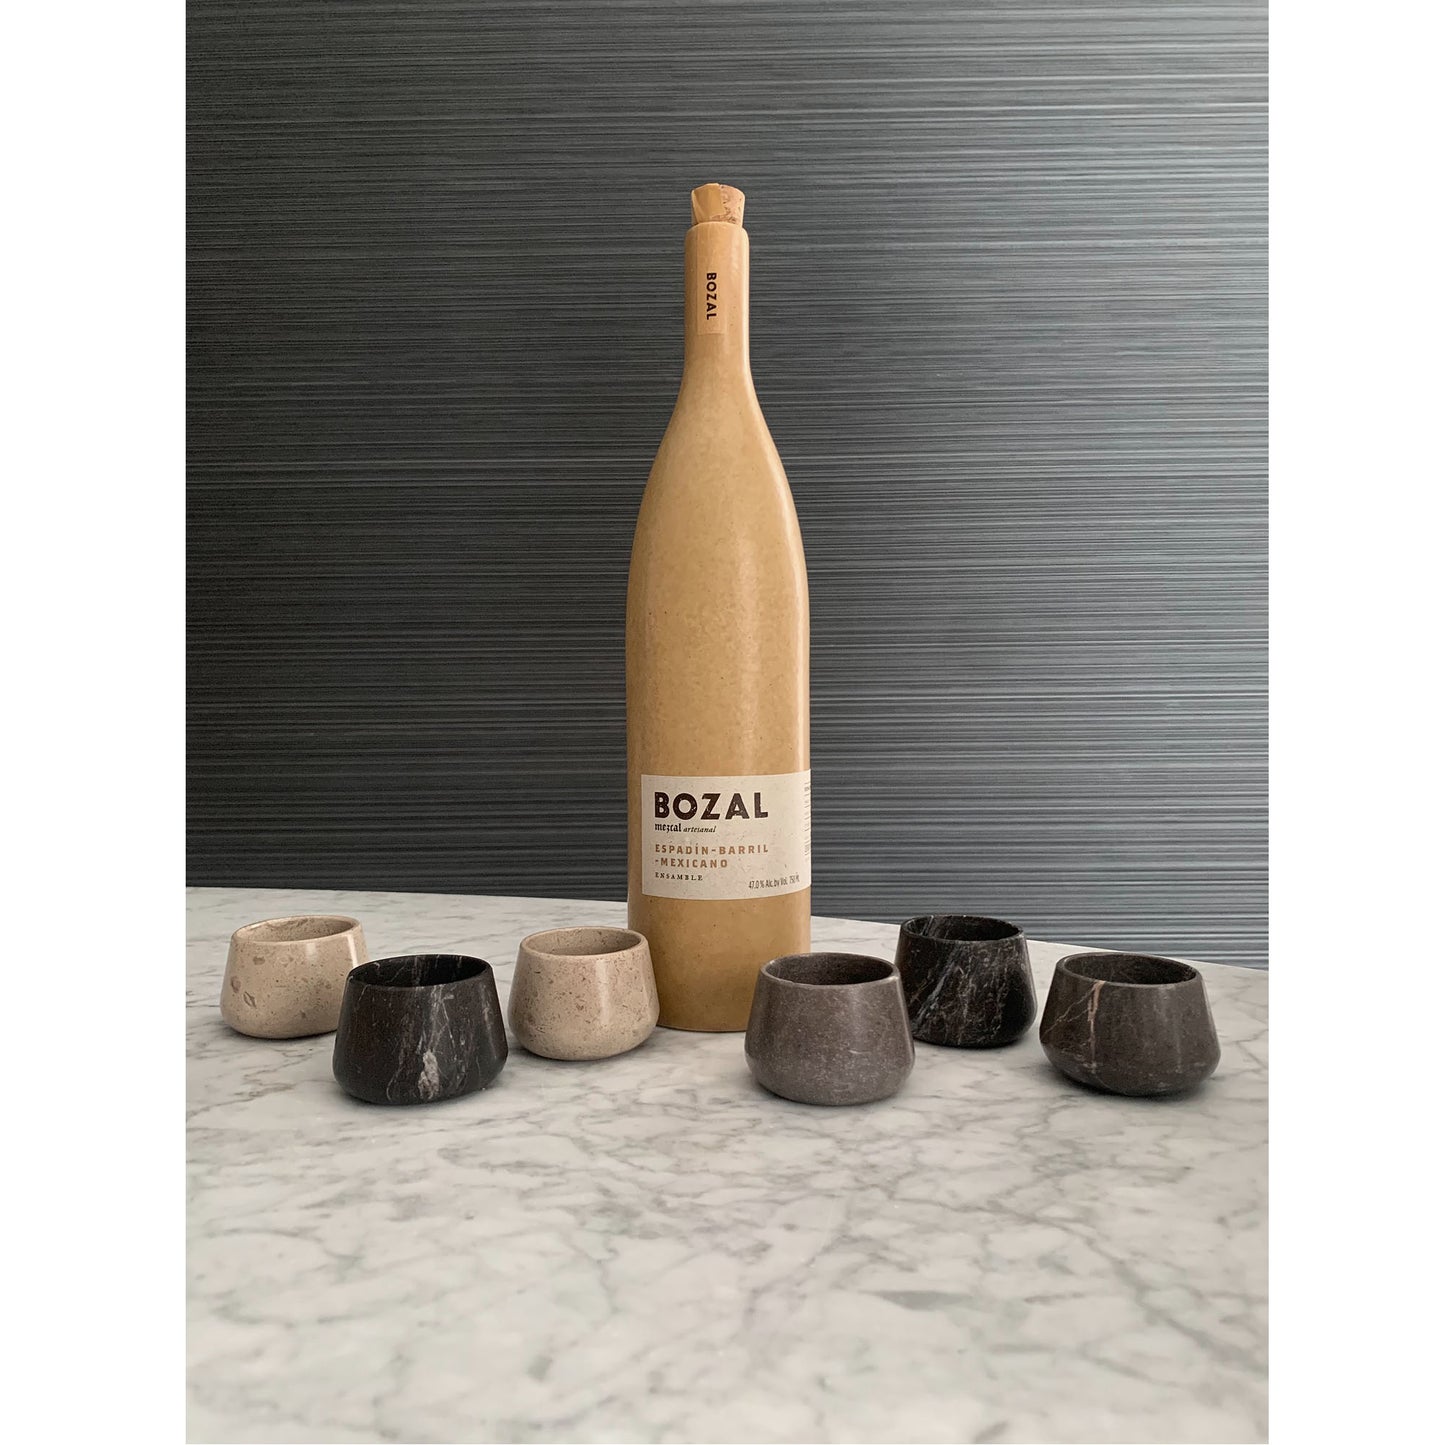 Marble Mezcal Copitas | Stone Shot Glasses | Handmade Mexican Mezcaleros - Available in Black, Gray or Beige